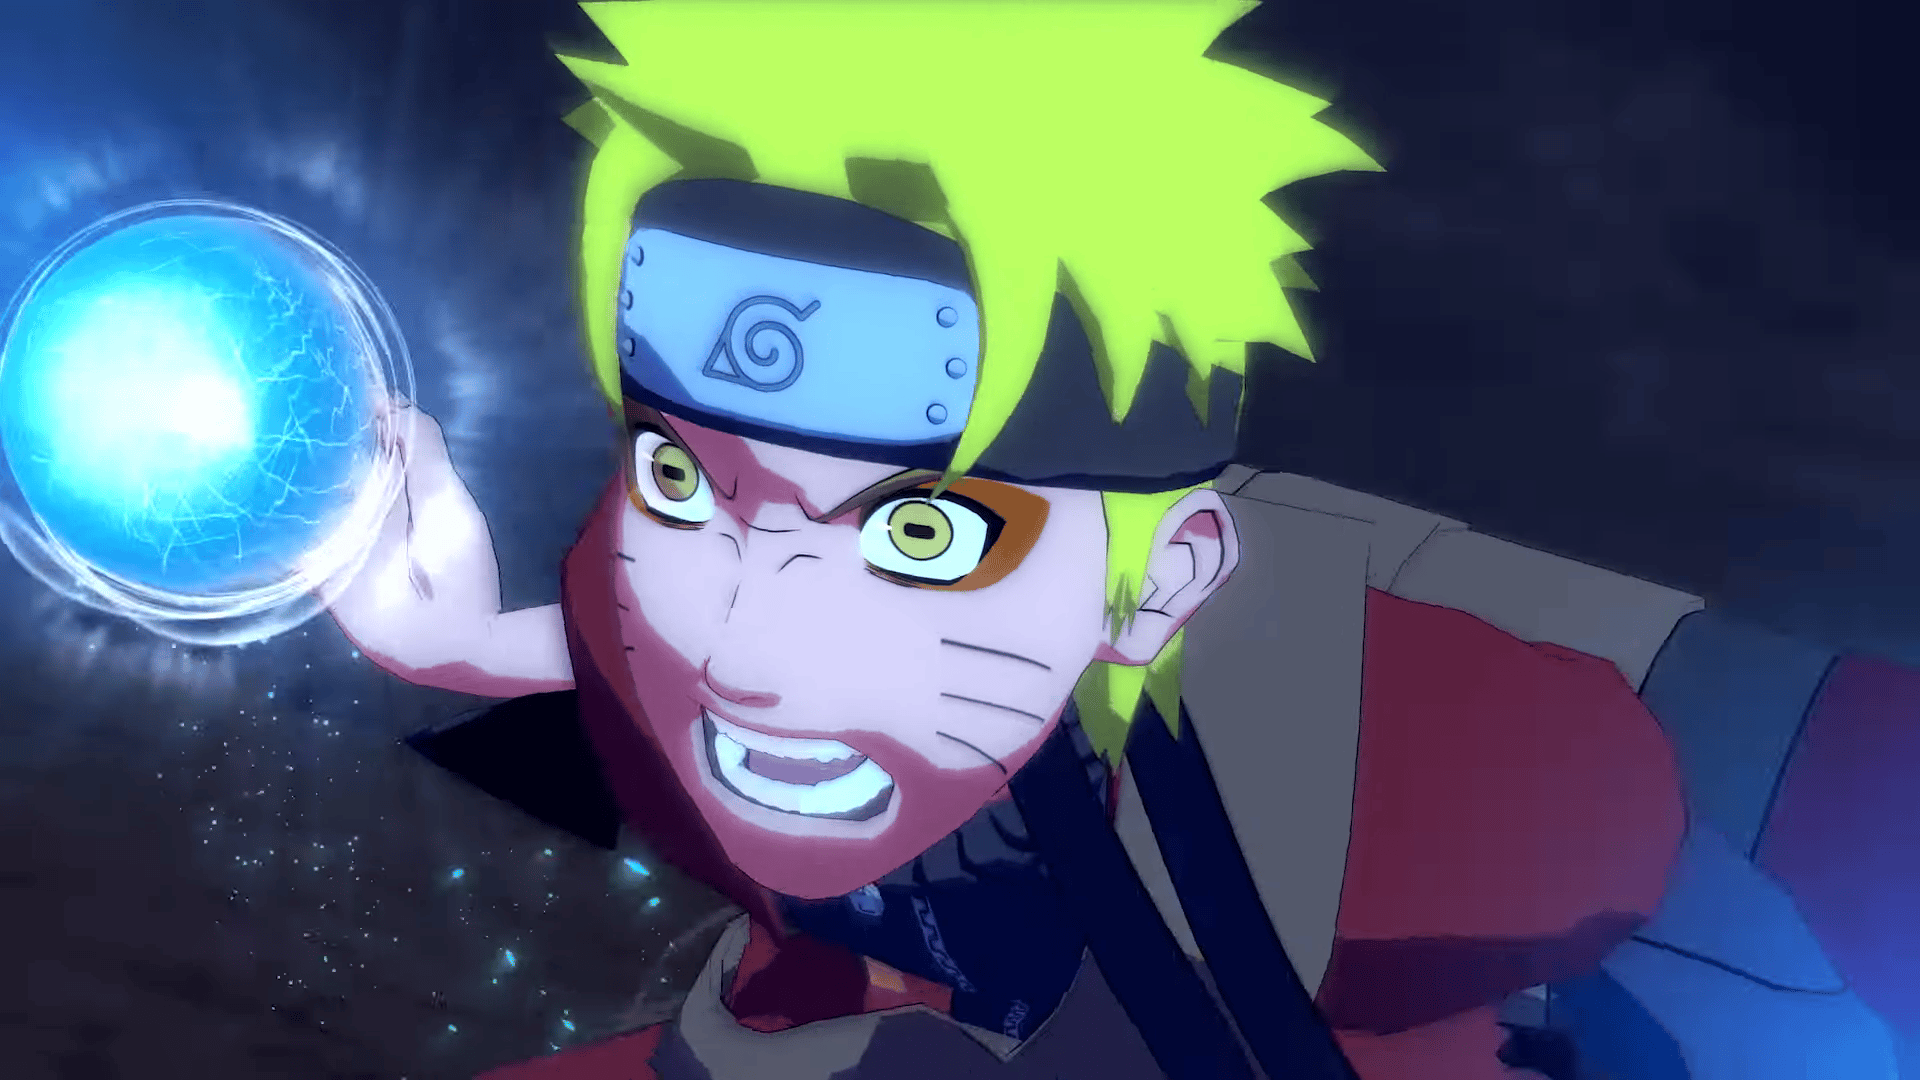 Naruto x Boruto Ultimate Ninja Storm Connections Releases in Featuring Largest Character Roster of Any Naruto Game